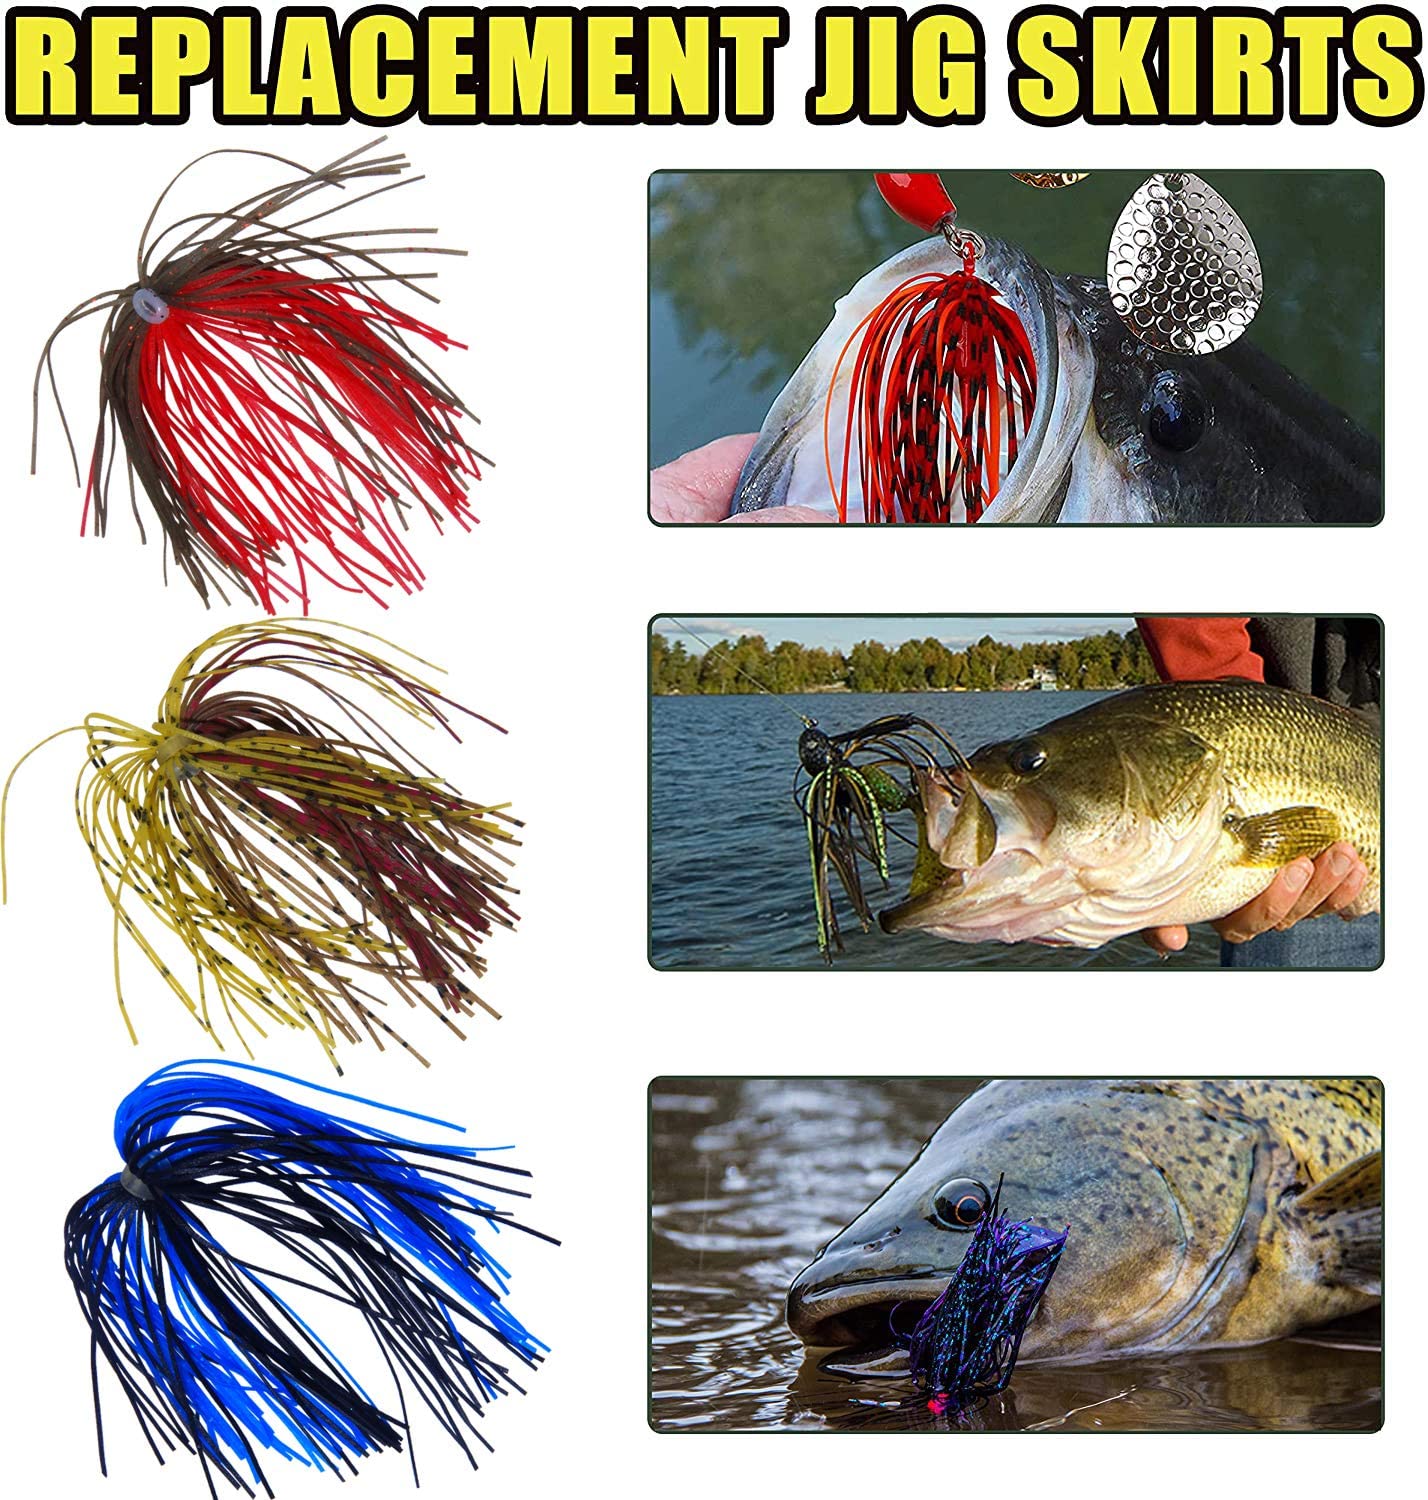 OROOTL 6 Bundles DIY Silicone Jig Skirts Spinnerbait Replacement Skirt for  Spinnerbaits Bass Buzzbaits 